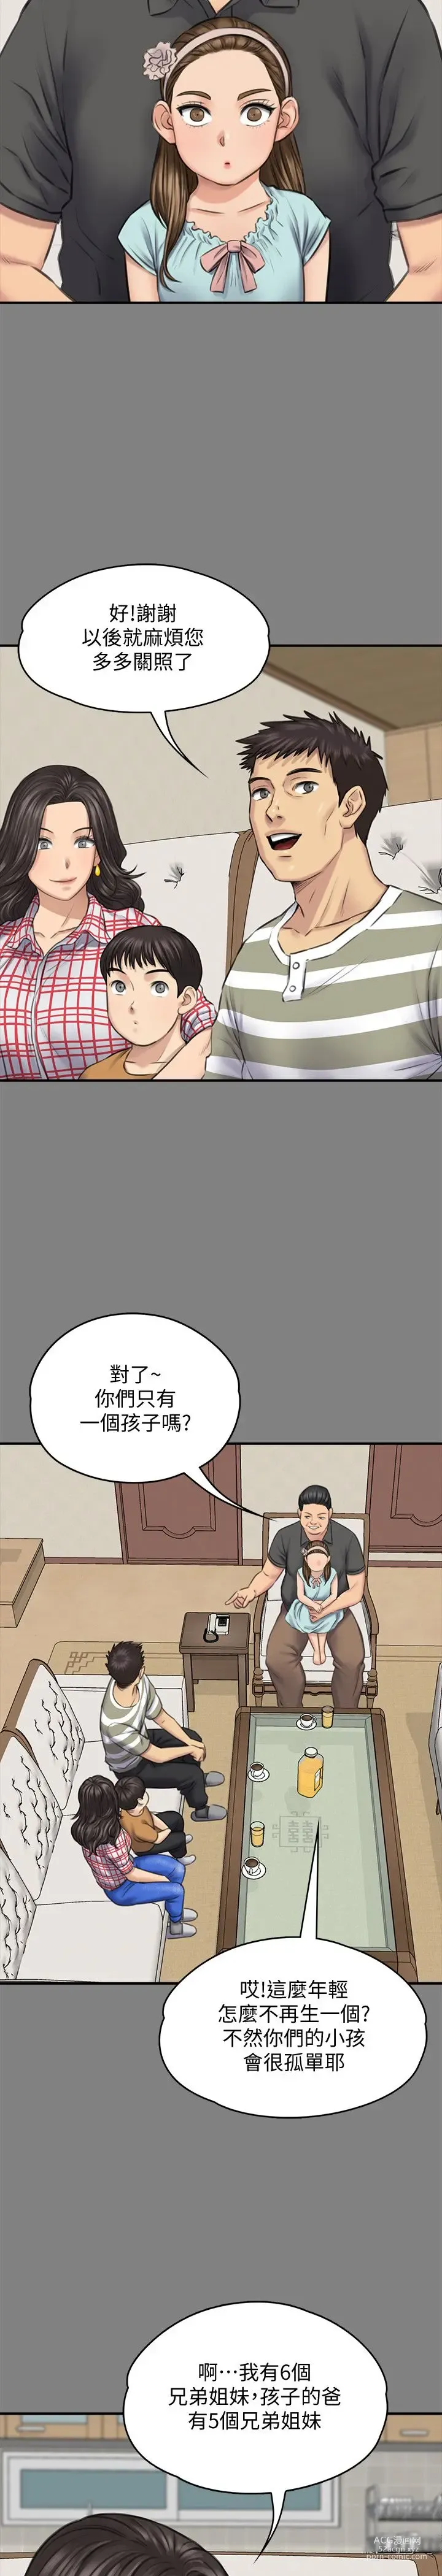 Page 11 of manga 傀儡 Queen Bee 101-150